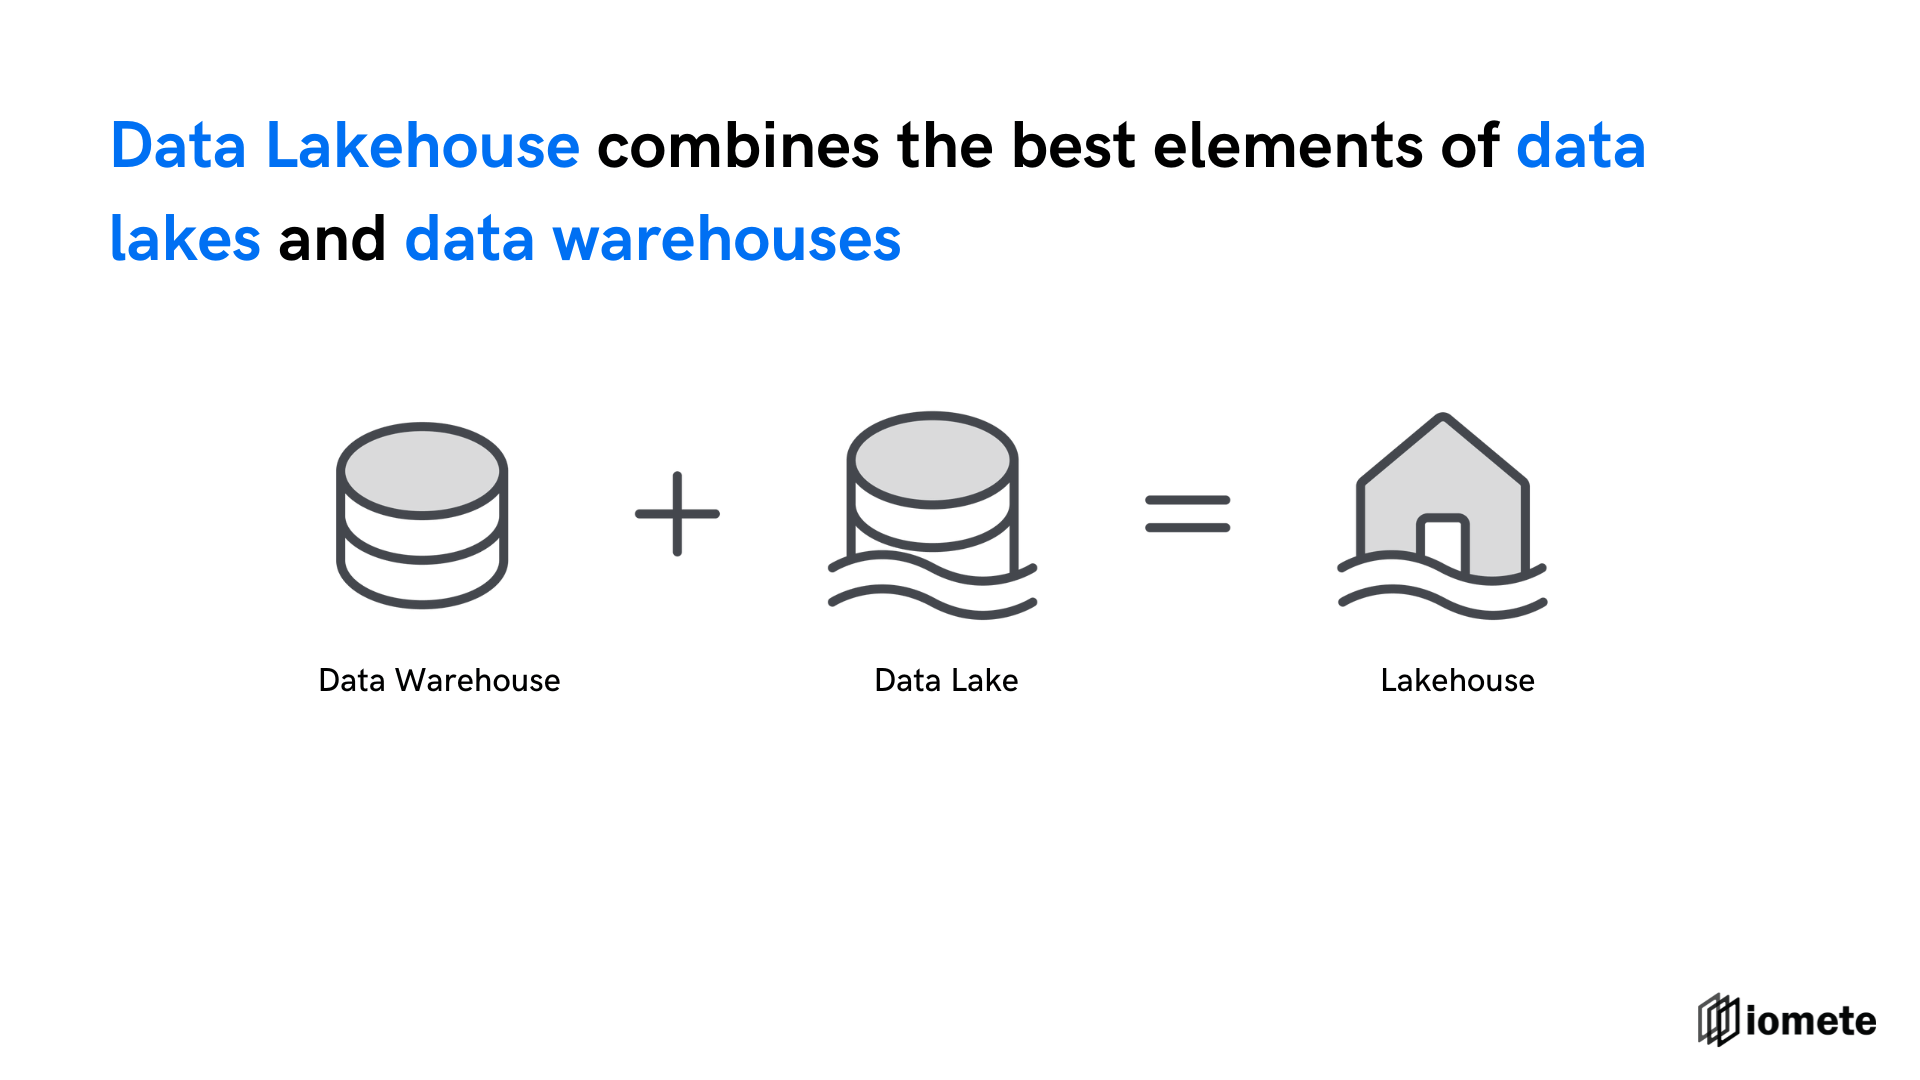 What is a Data Lakehouse